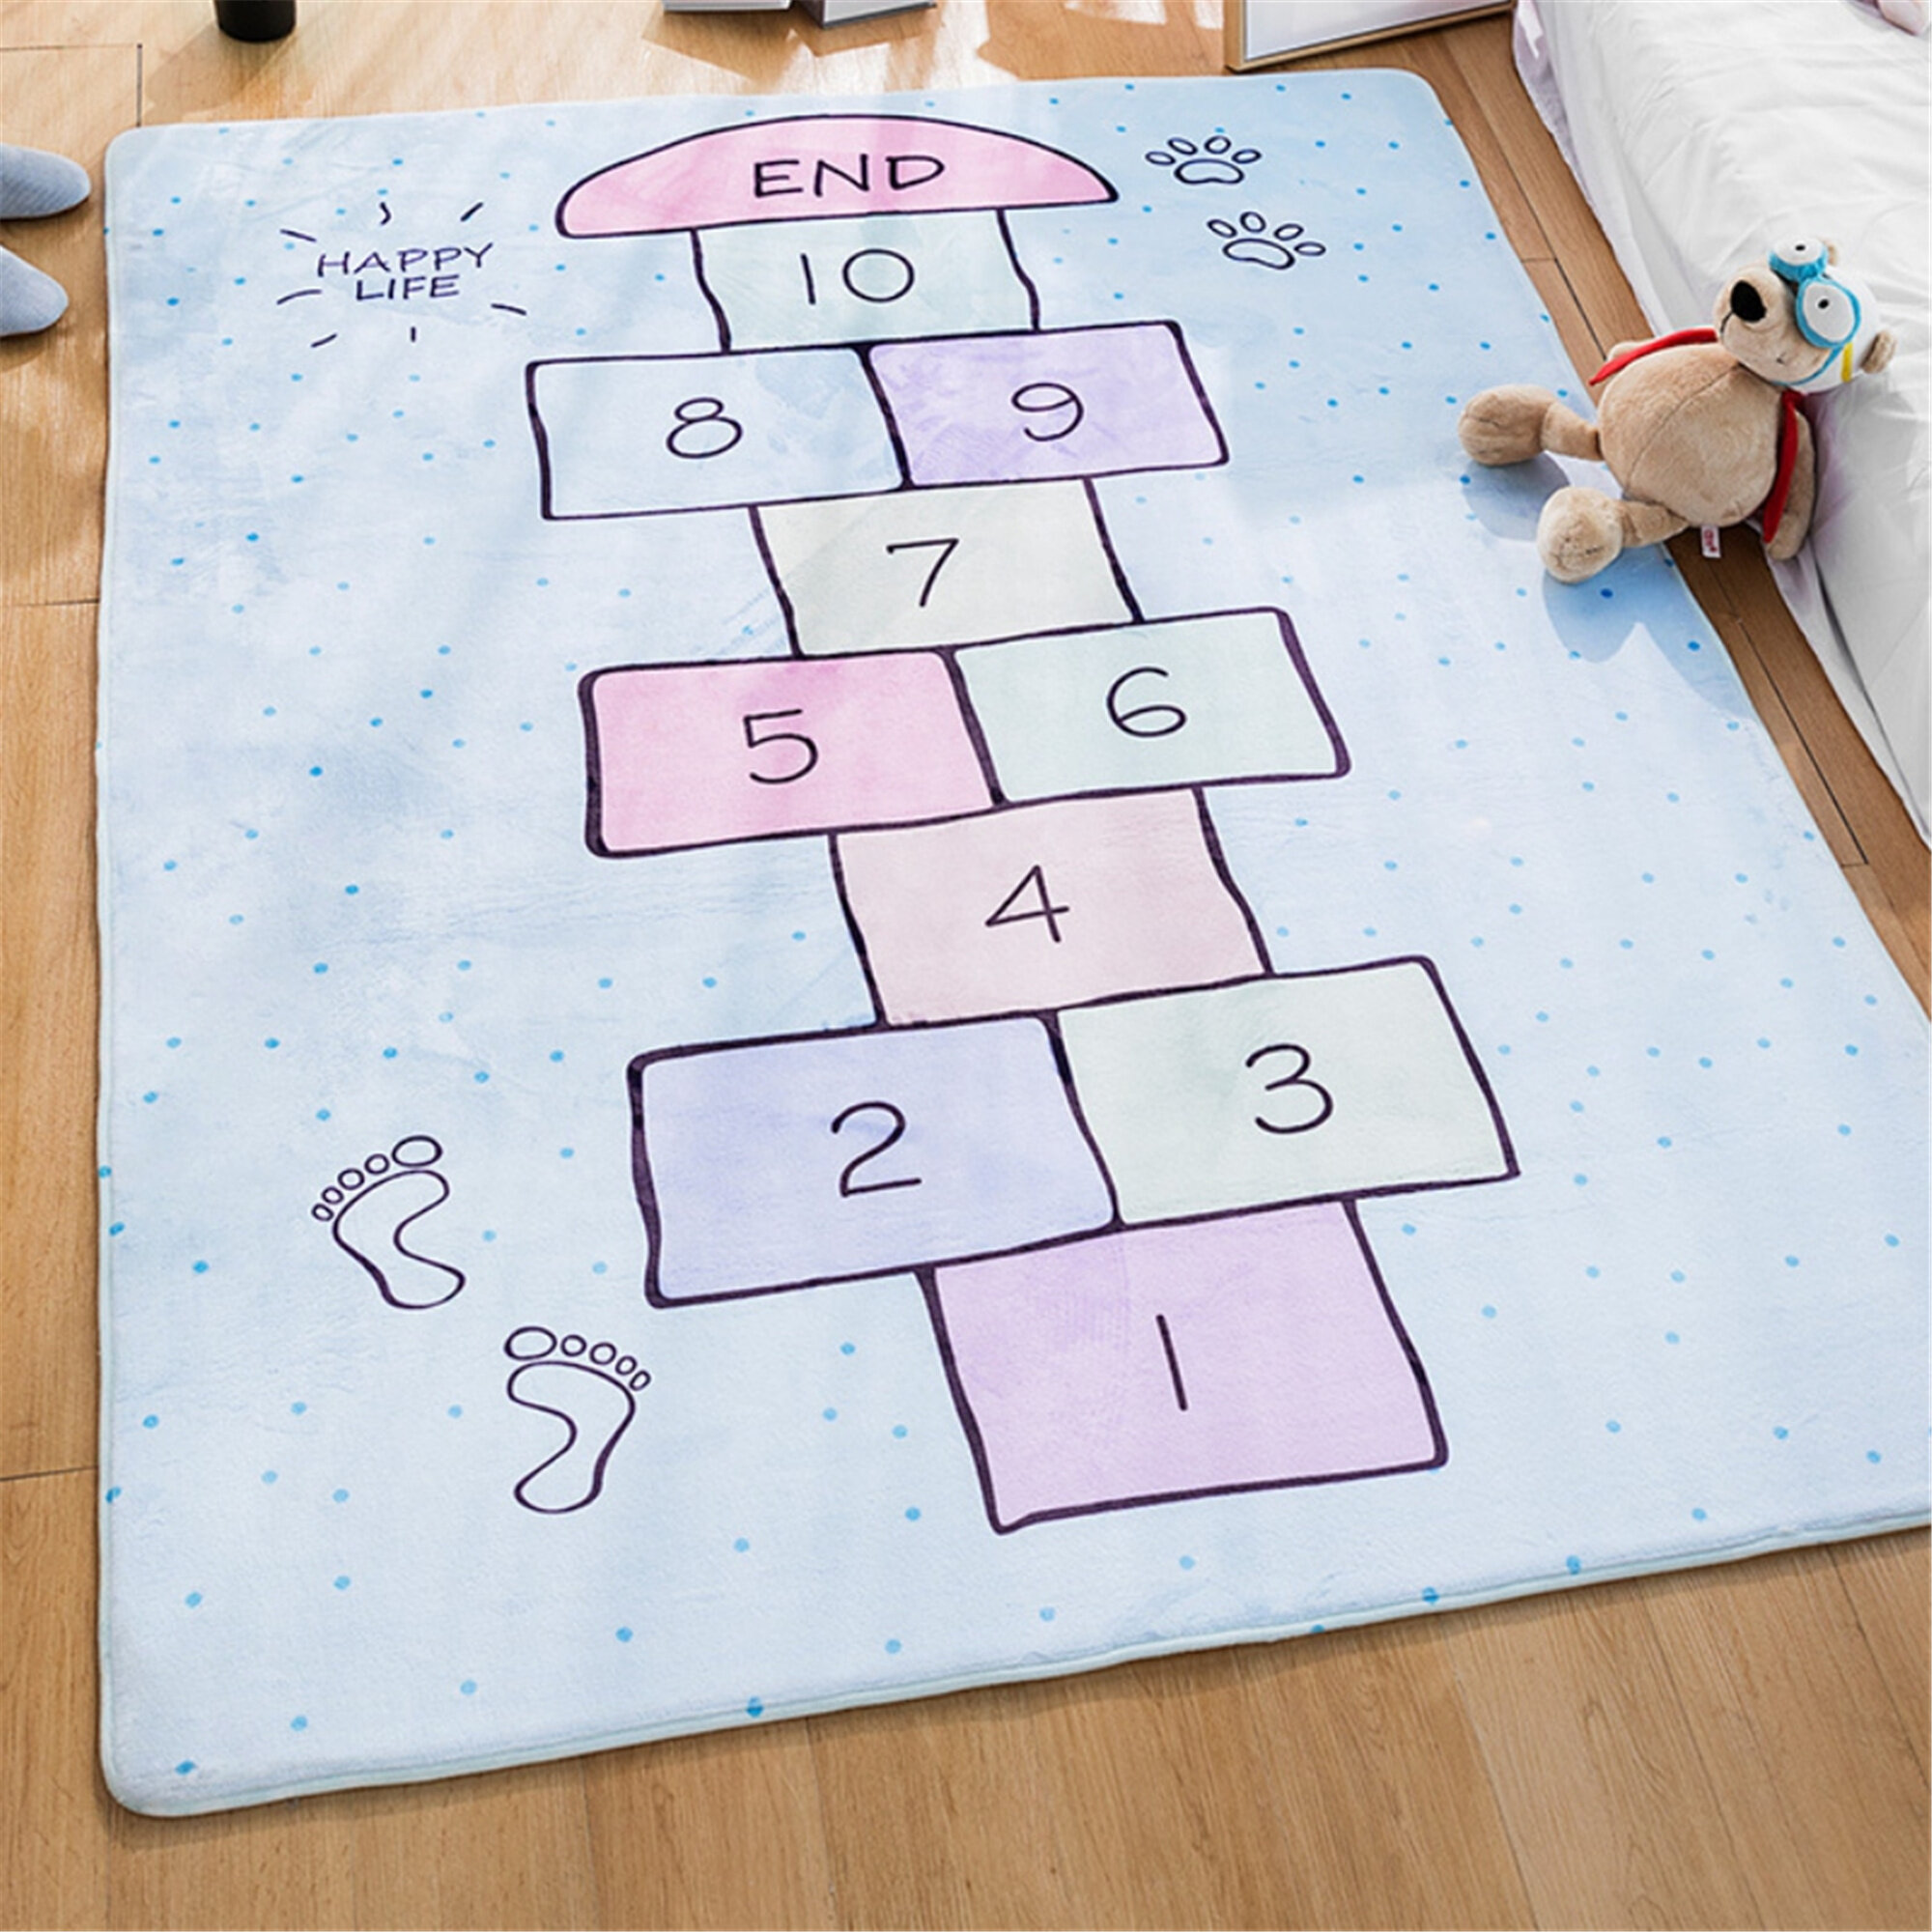 Classroom Hopscotch Rug Hop and Count Game Rug with Cute Colorful Design Anti-Slip Kids Play Mat Soft Floor Area Rug and Carpet for Bedroom Nursery Sturdy Gift for Girls & Boys